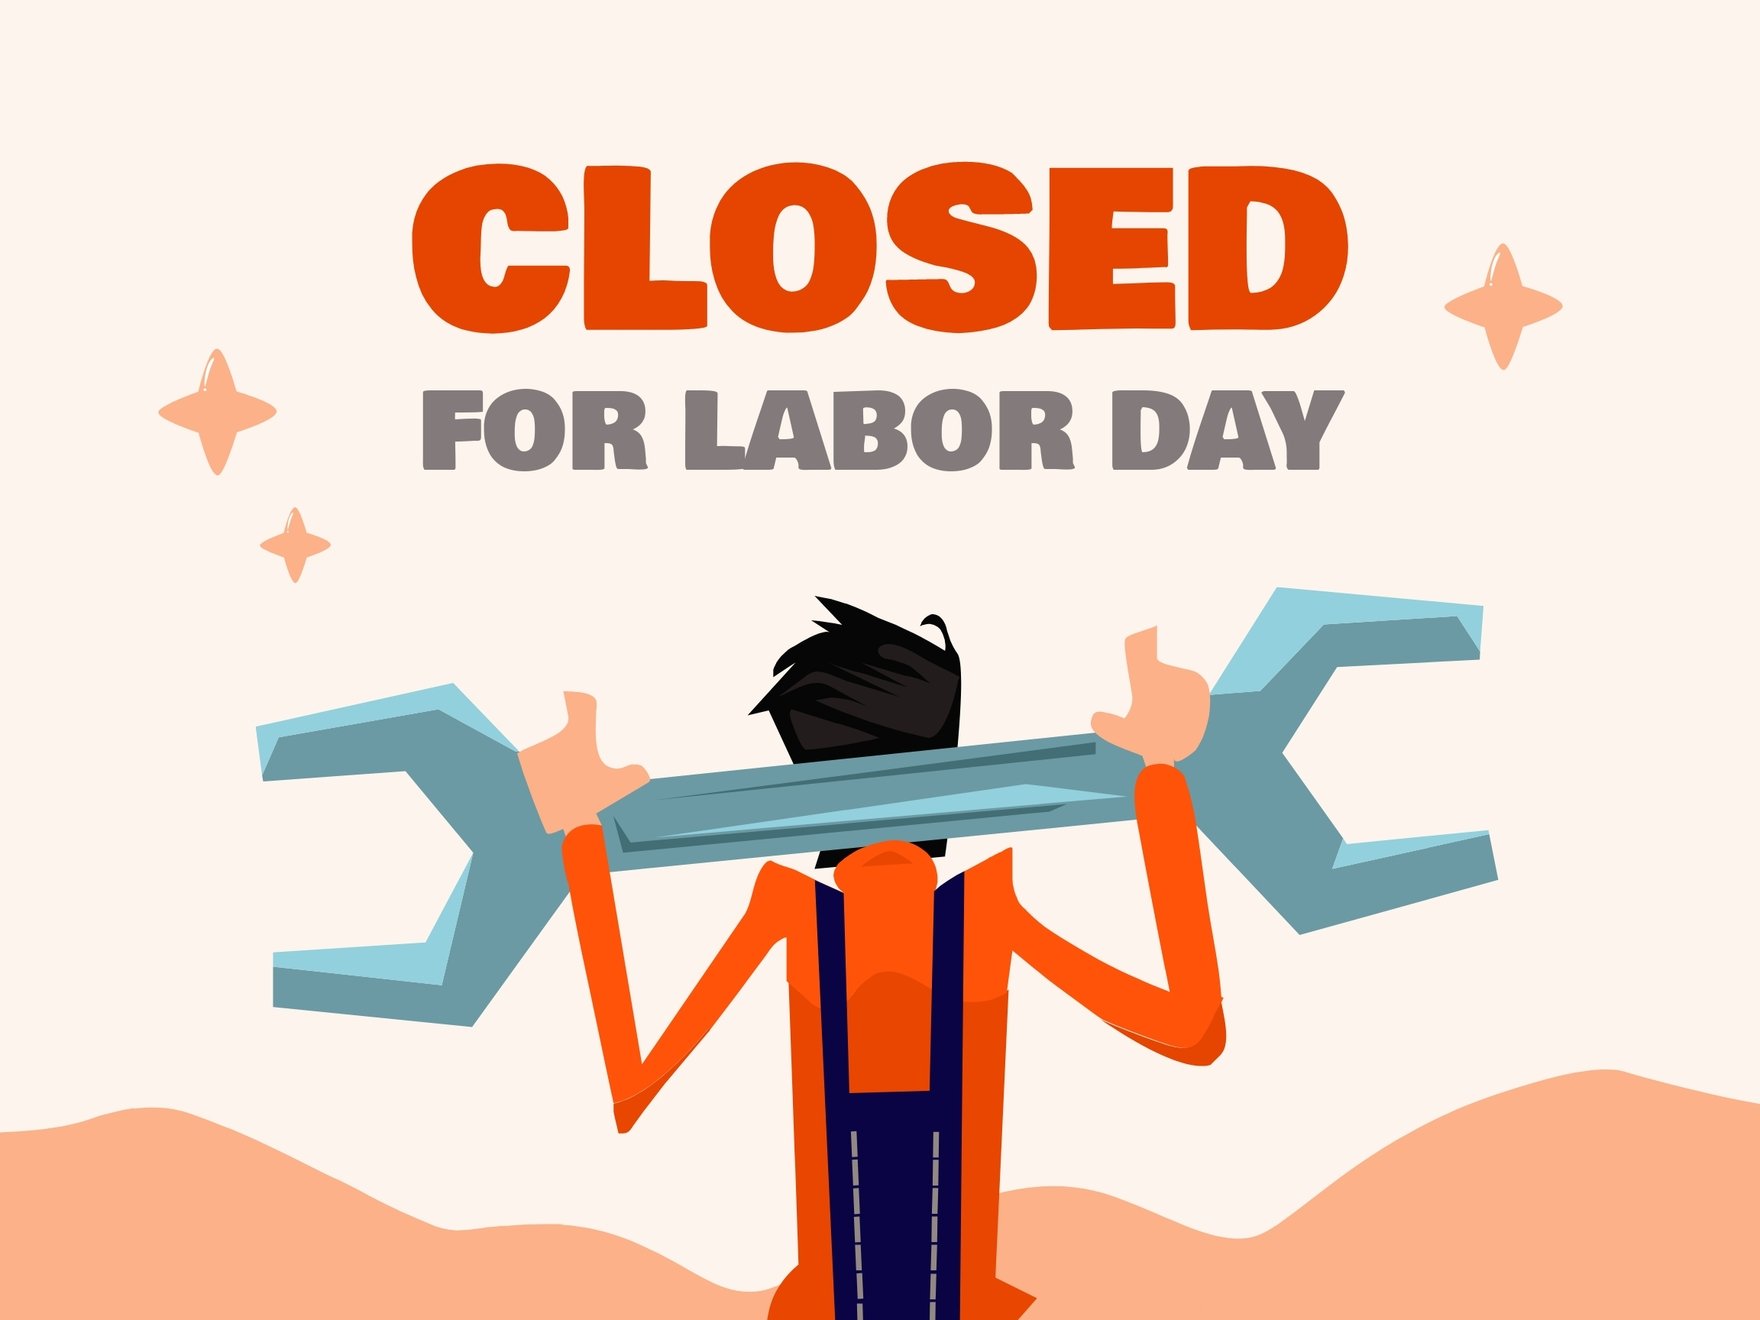 Free Closing For Labor Day Sign Template